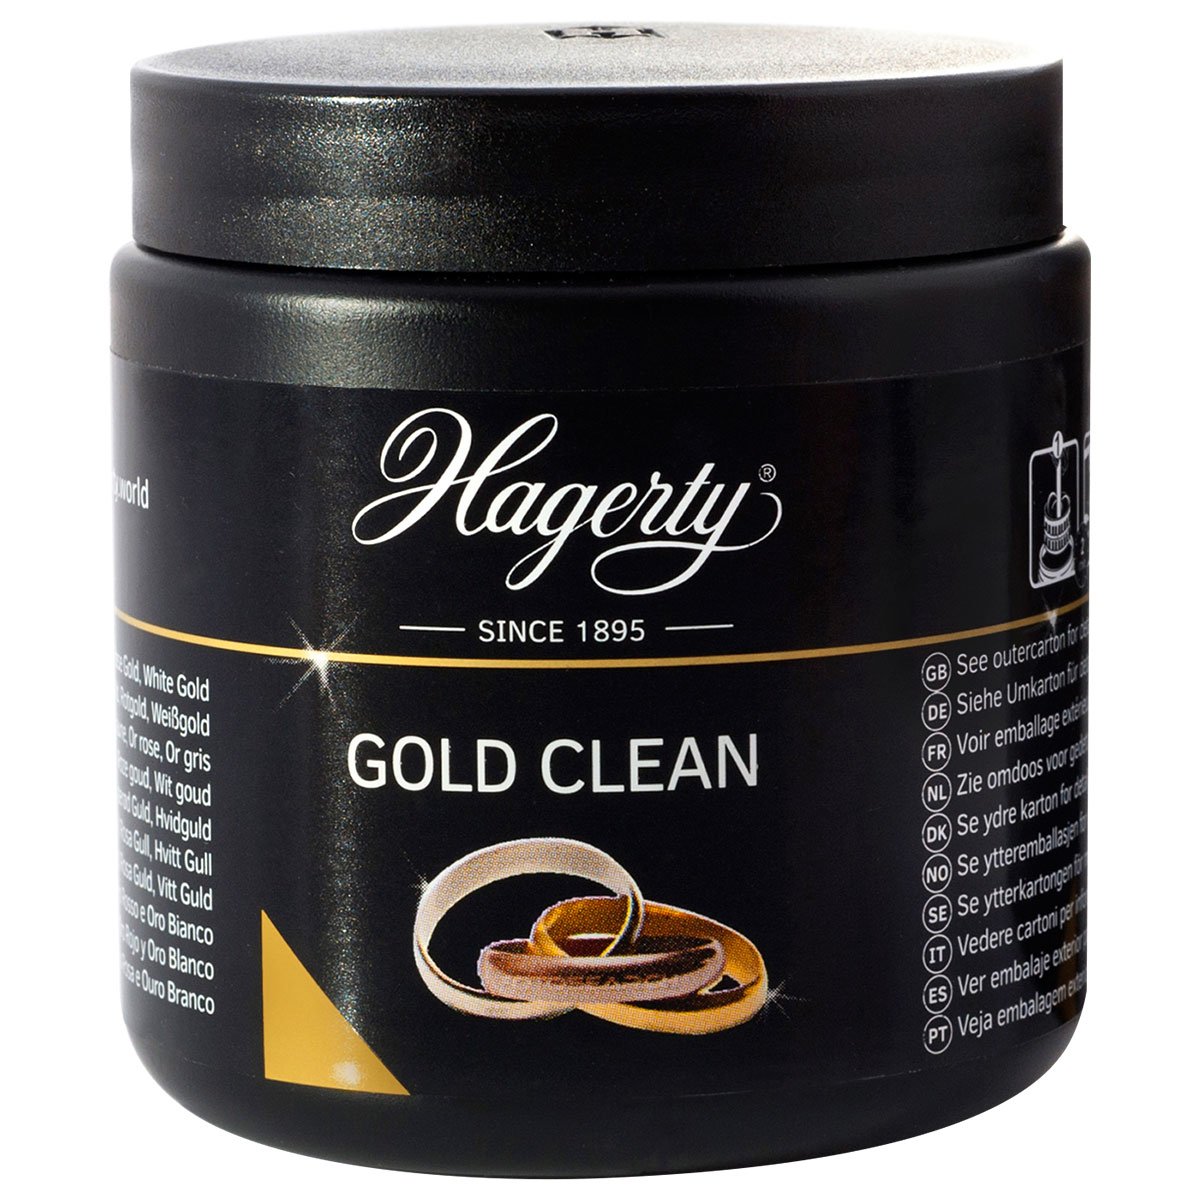 Hagerty Gold Clean, dompelbad voor goud, 170 ml